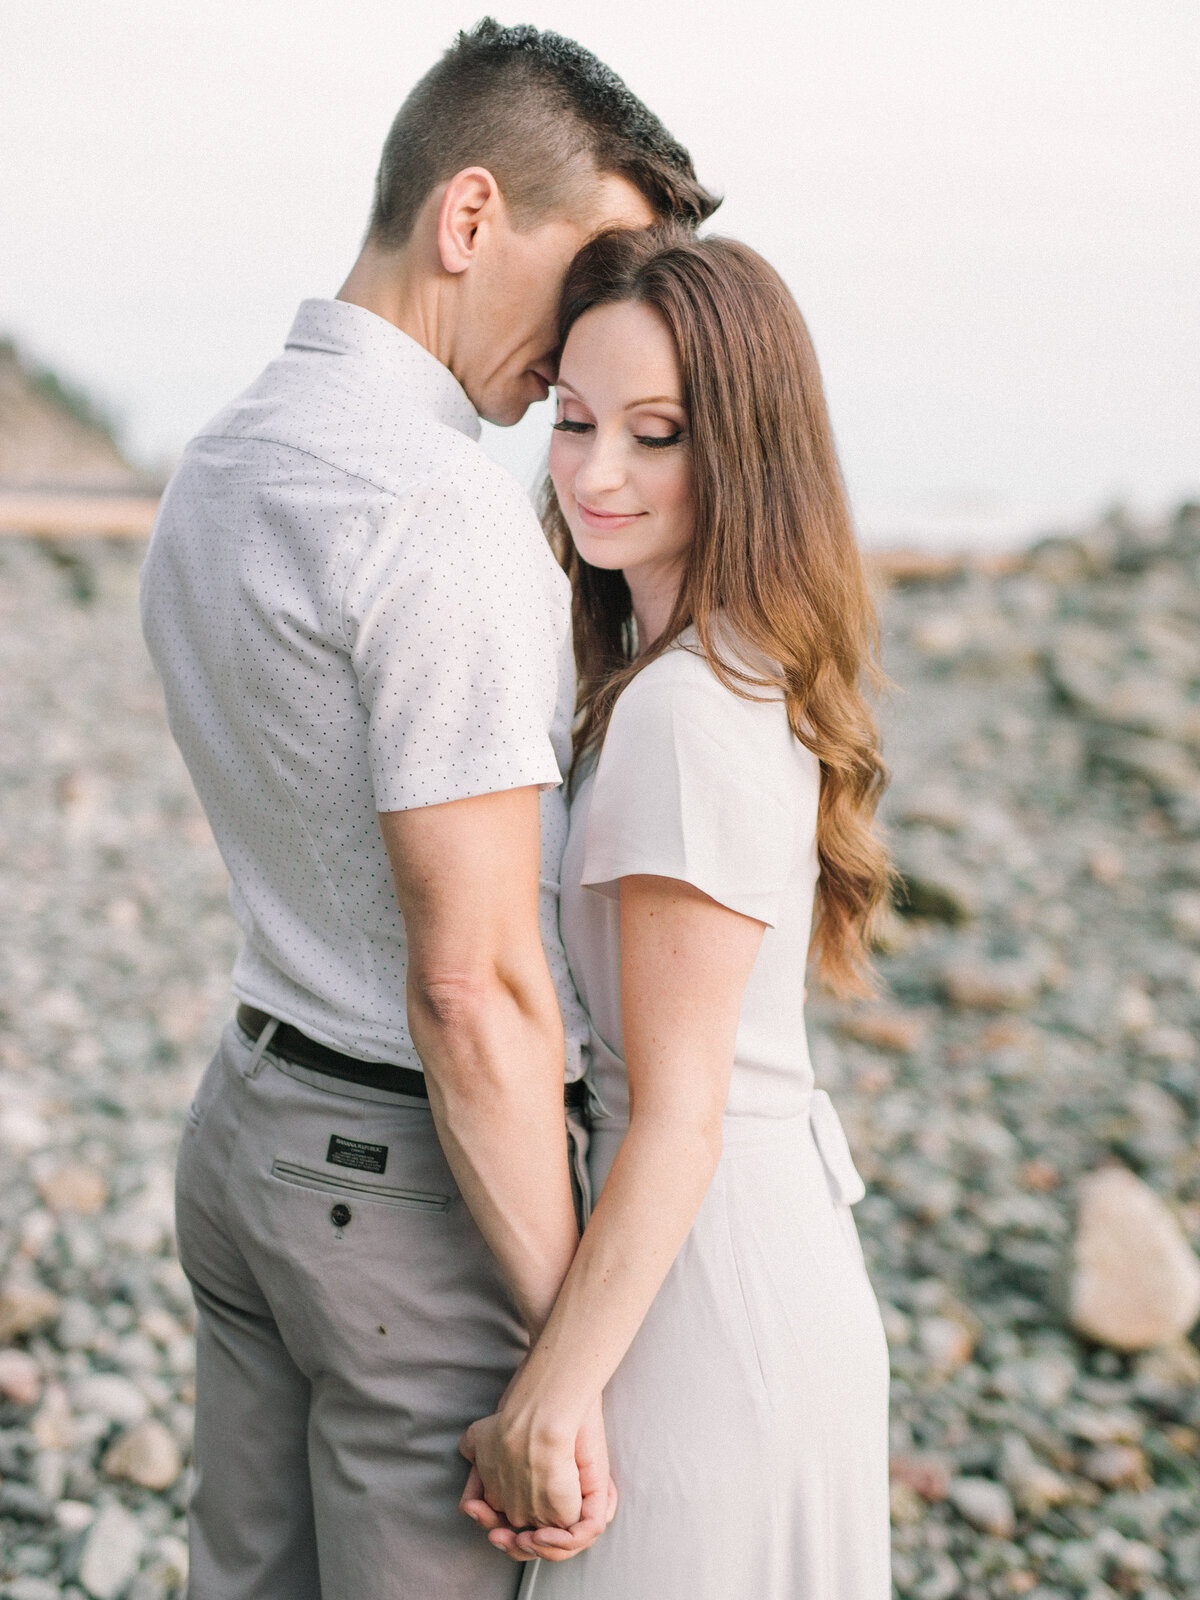 10 Vancouver Whytecliff Park Engagement Perla Photography-108